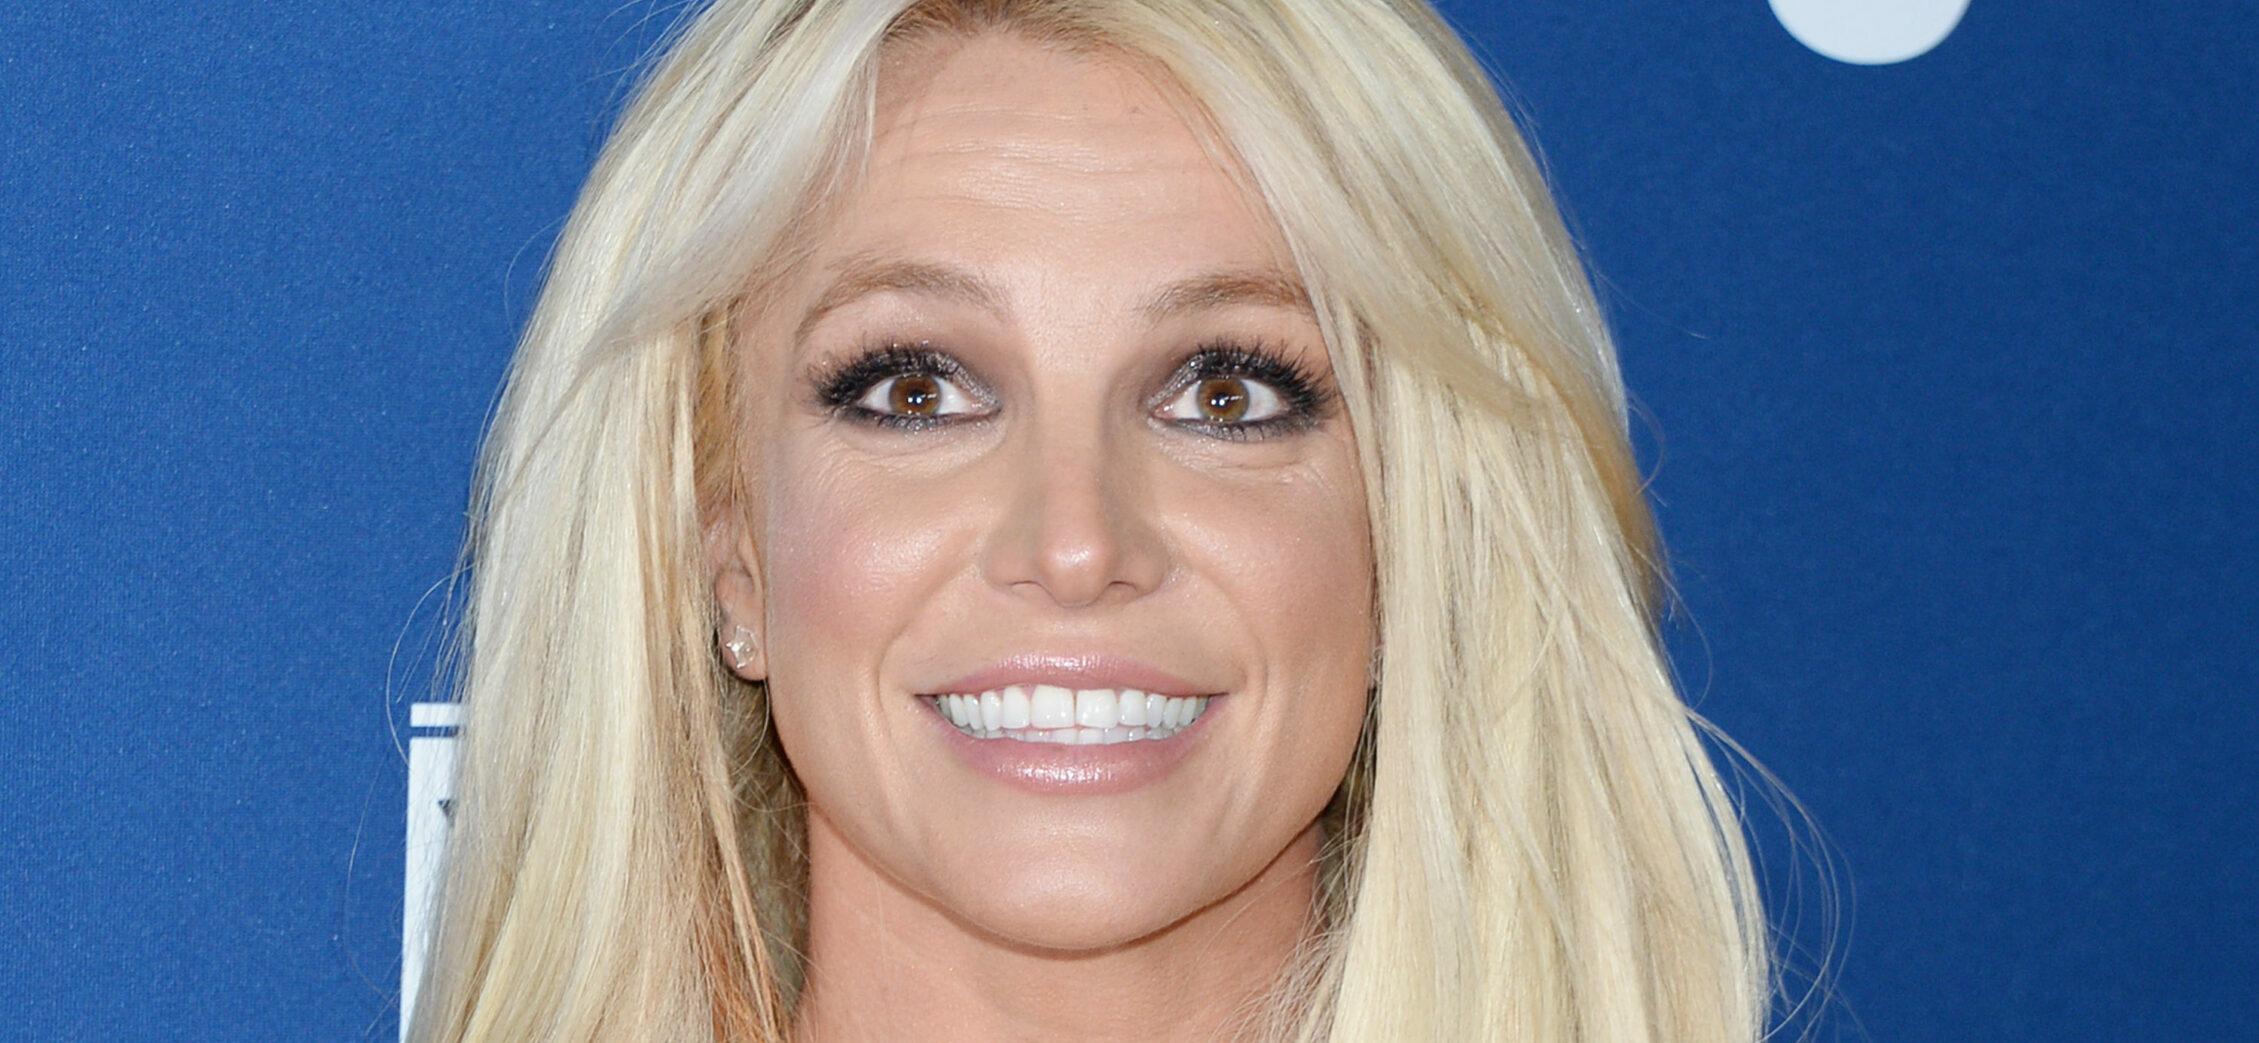 Britney Spears Jokes About Teaching ‘A Private Class’ To Fans